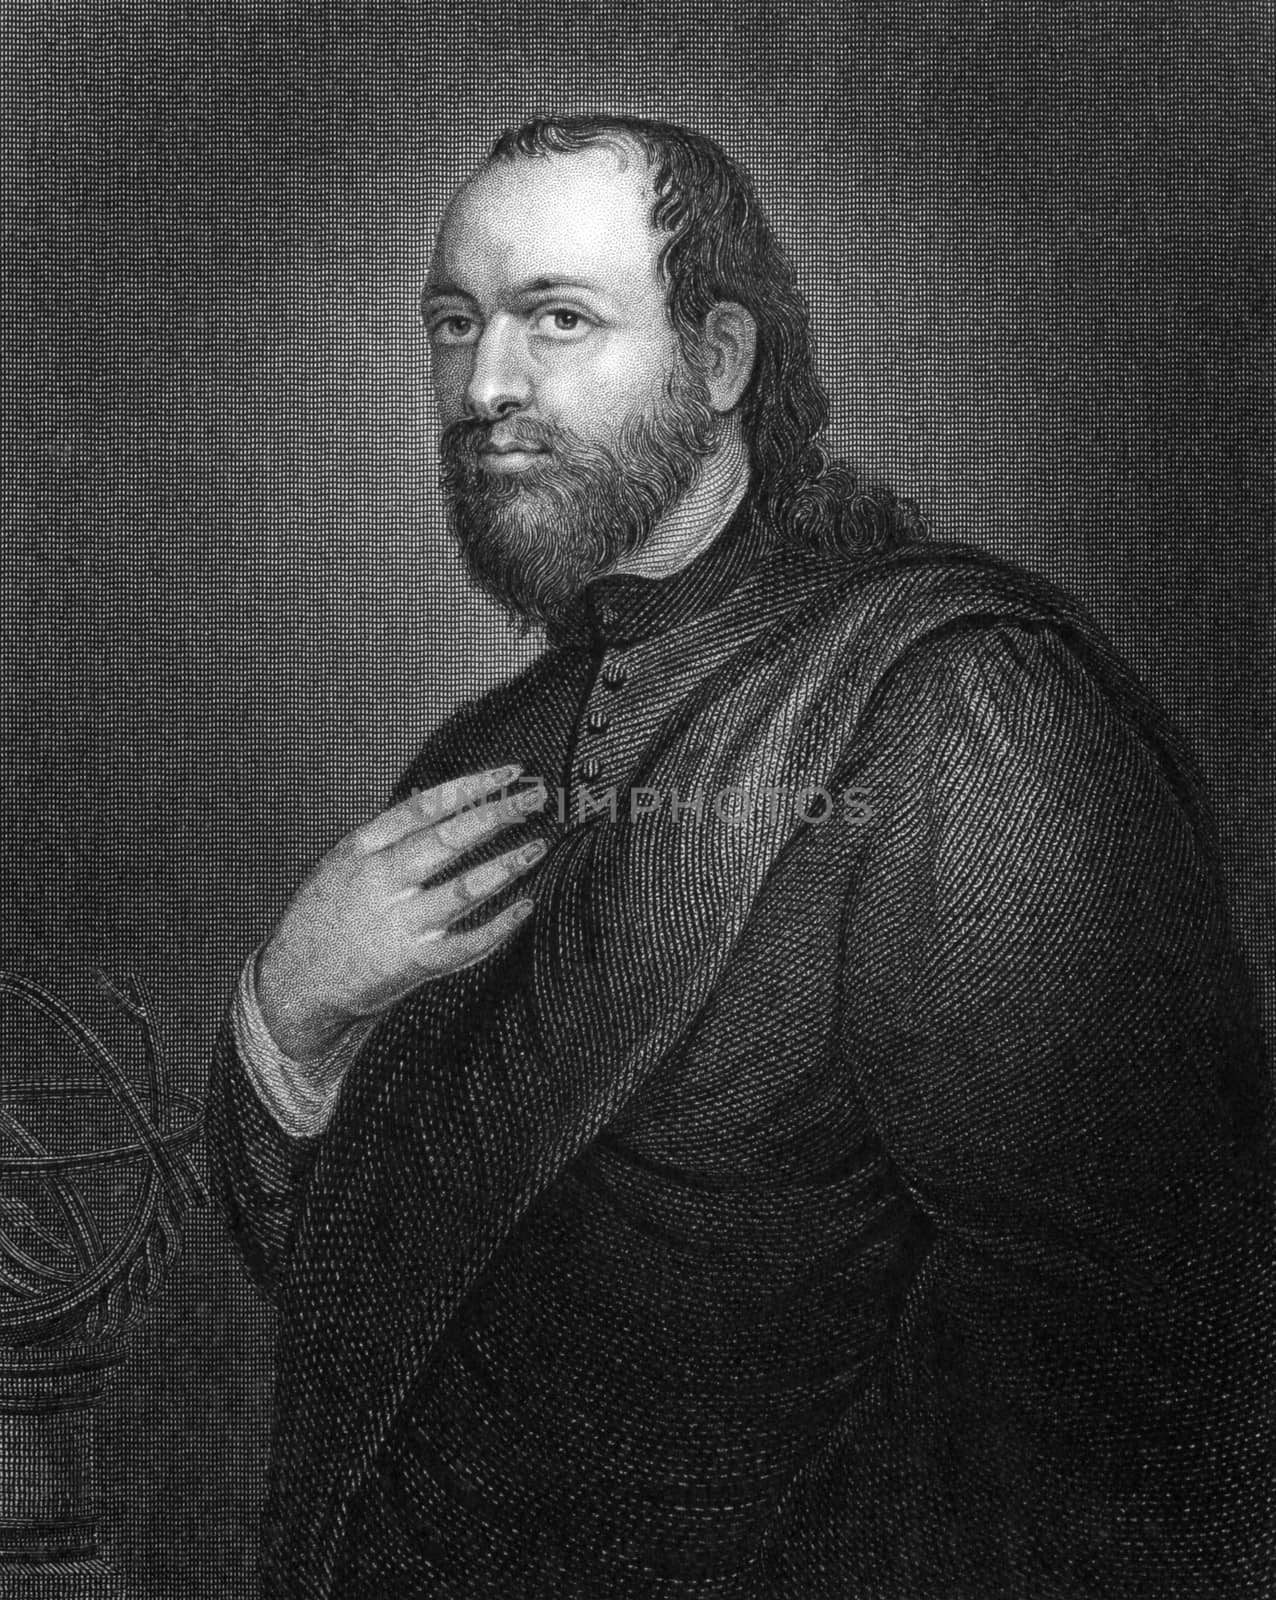 Kenelm Digby (1603-1665) on engraving from 1827. English courtier and diplomat. Engraved by R.Cooper and published in ''Portraits of Illustrious Personages of Great Britain'',UK,1827.